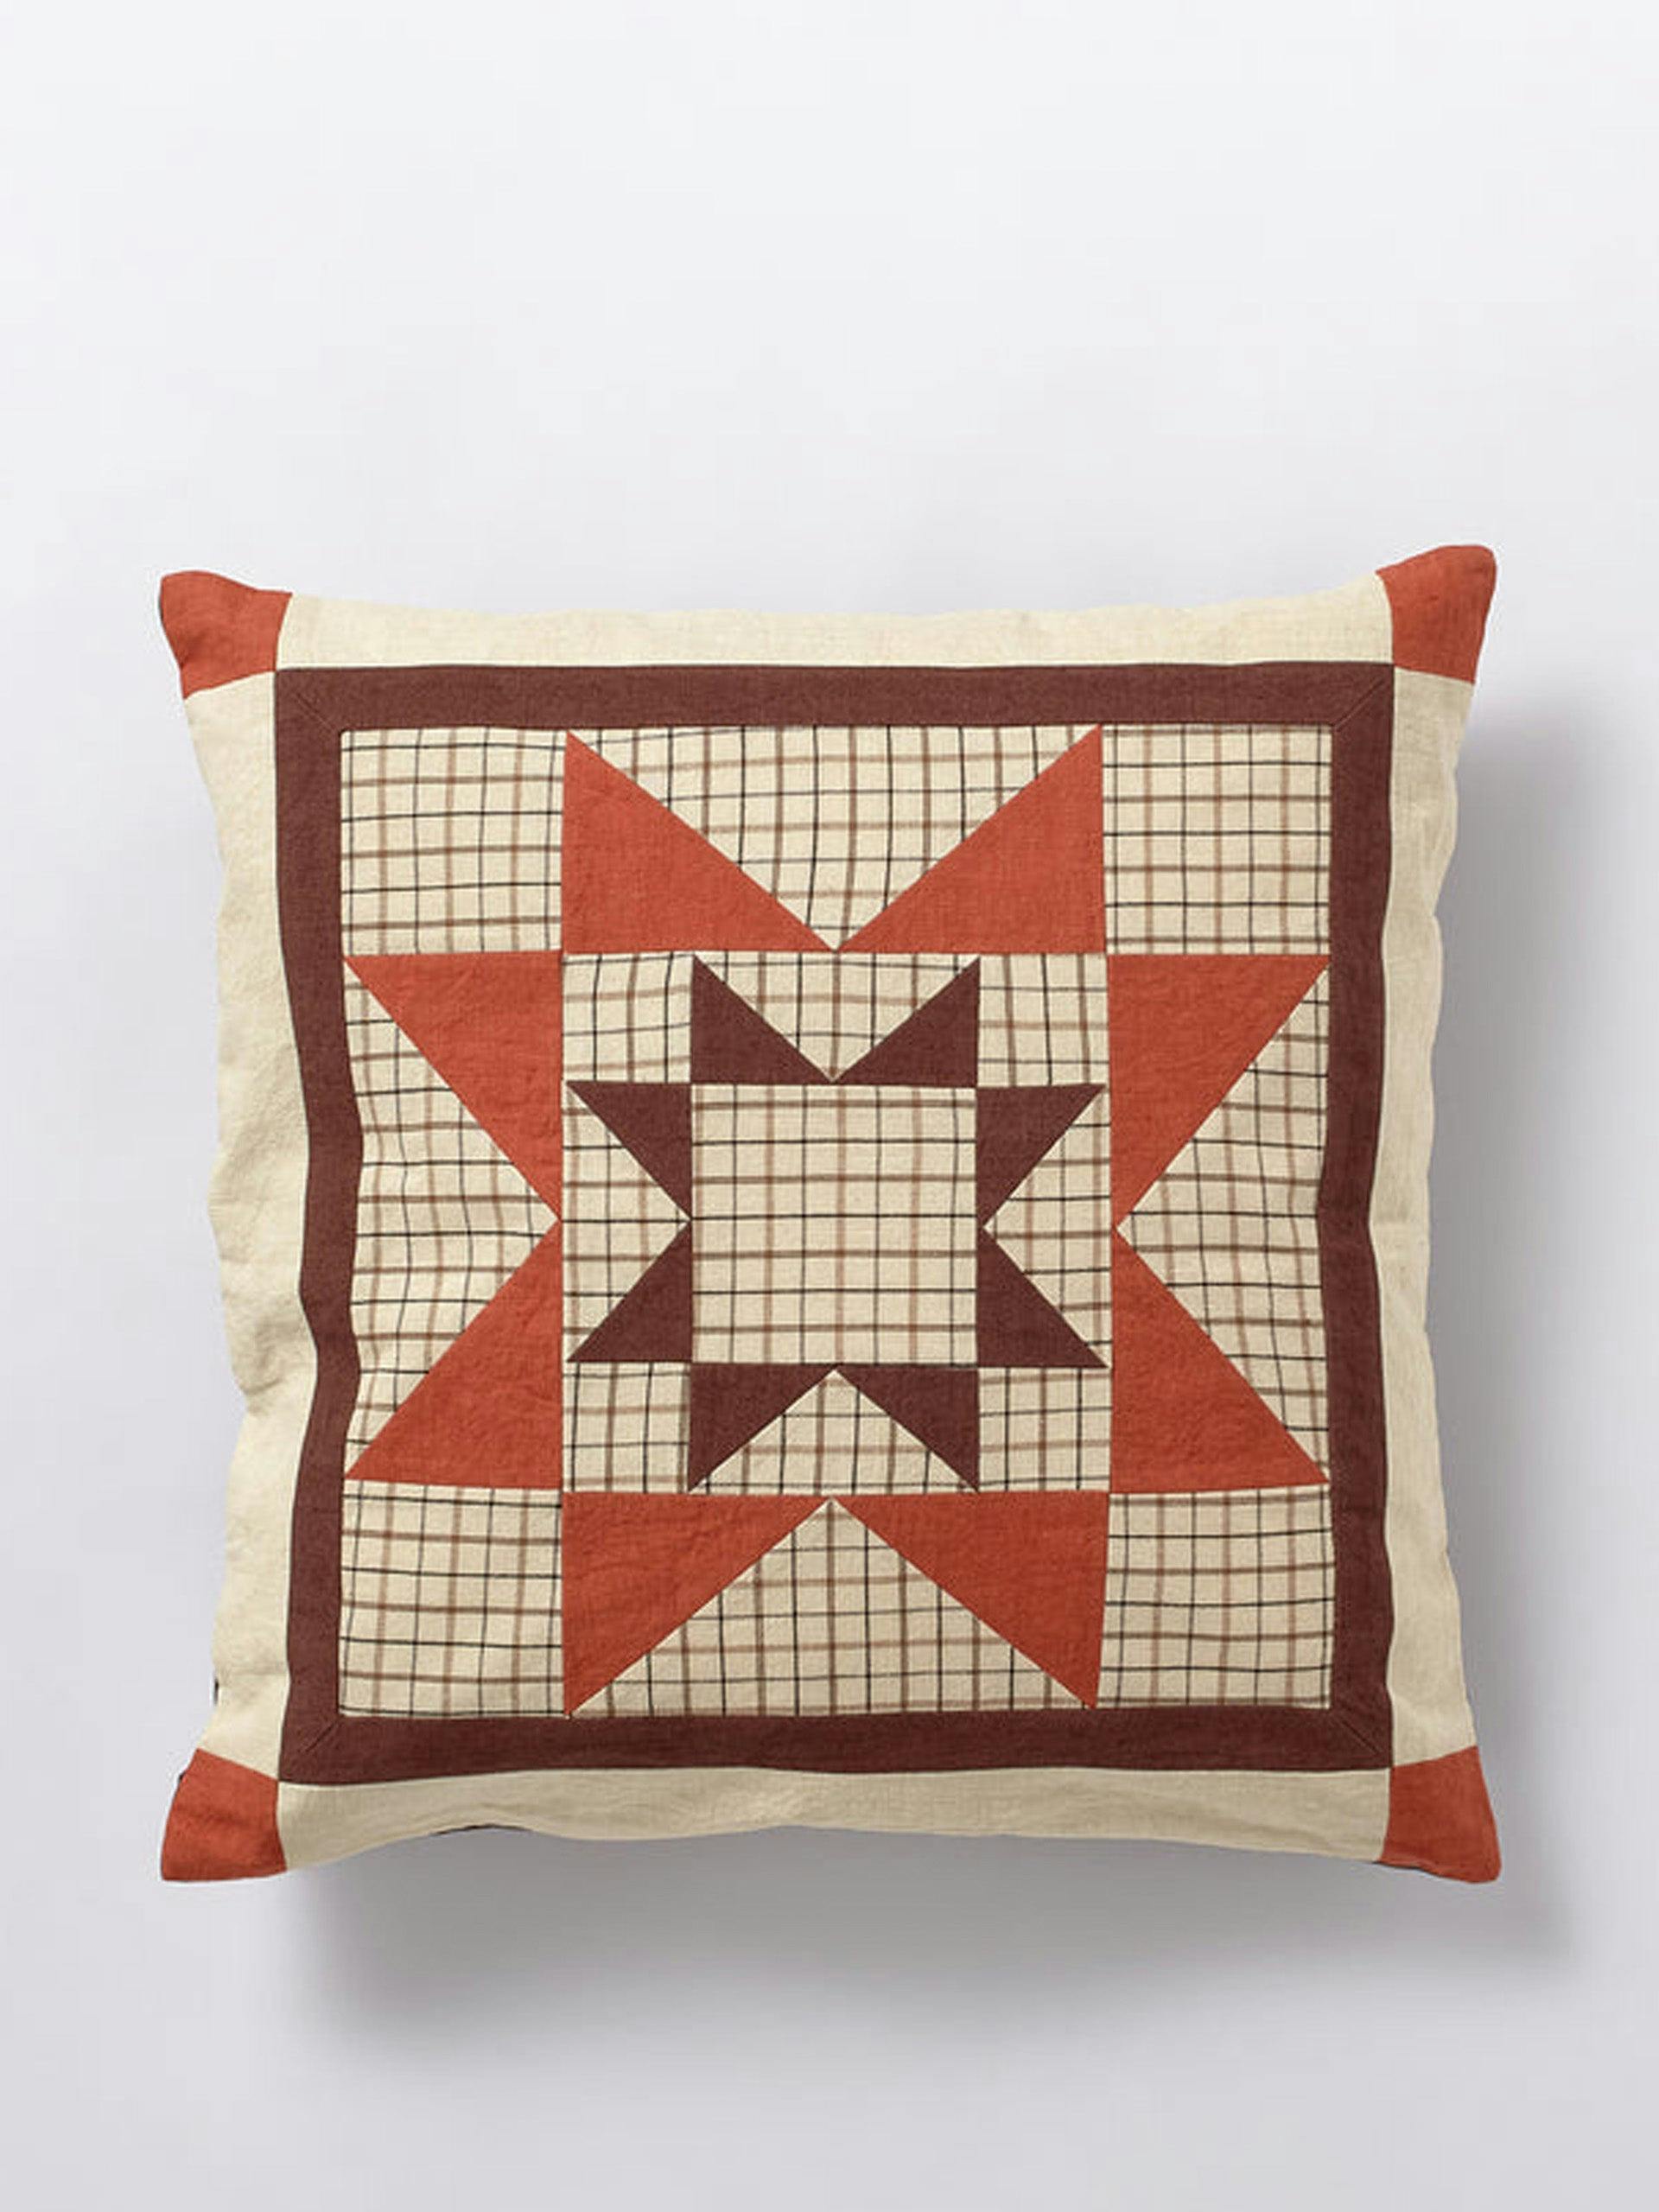 Circus star patchwork cushion cover